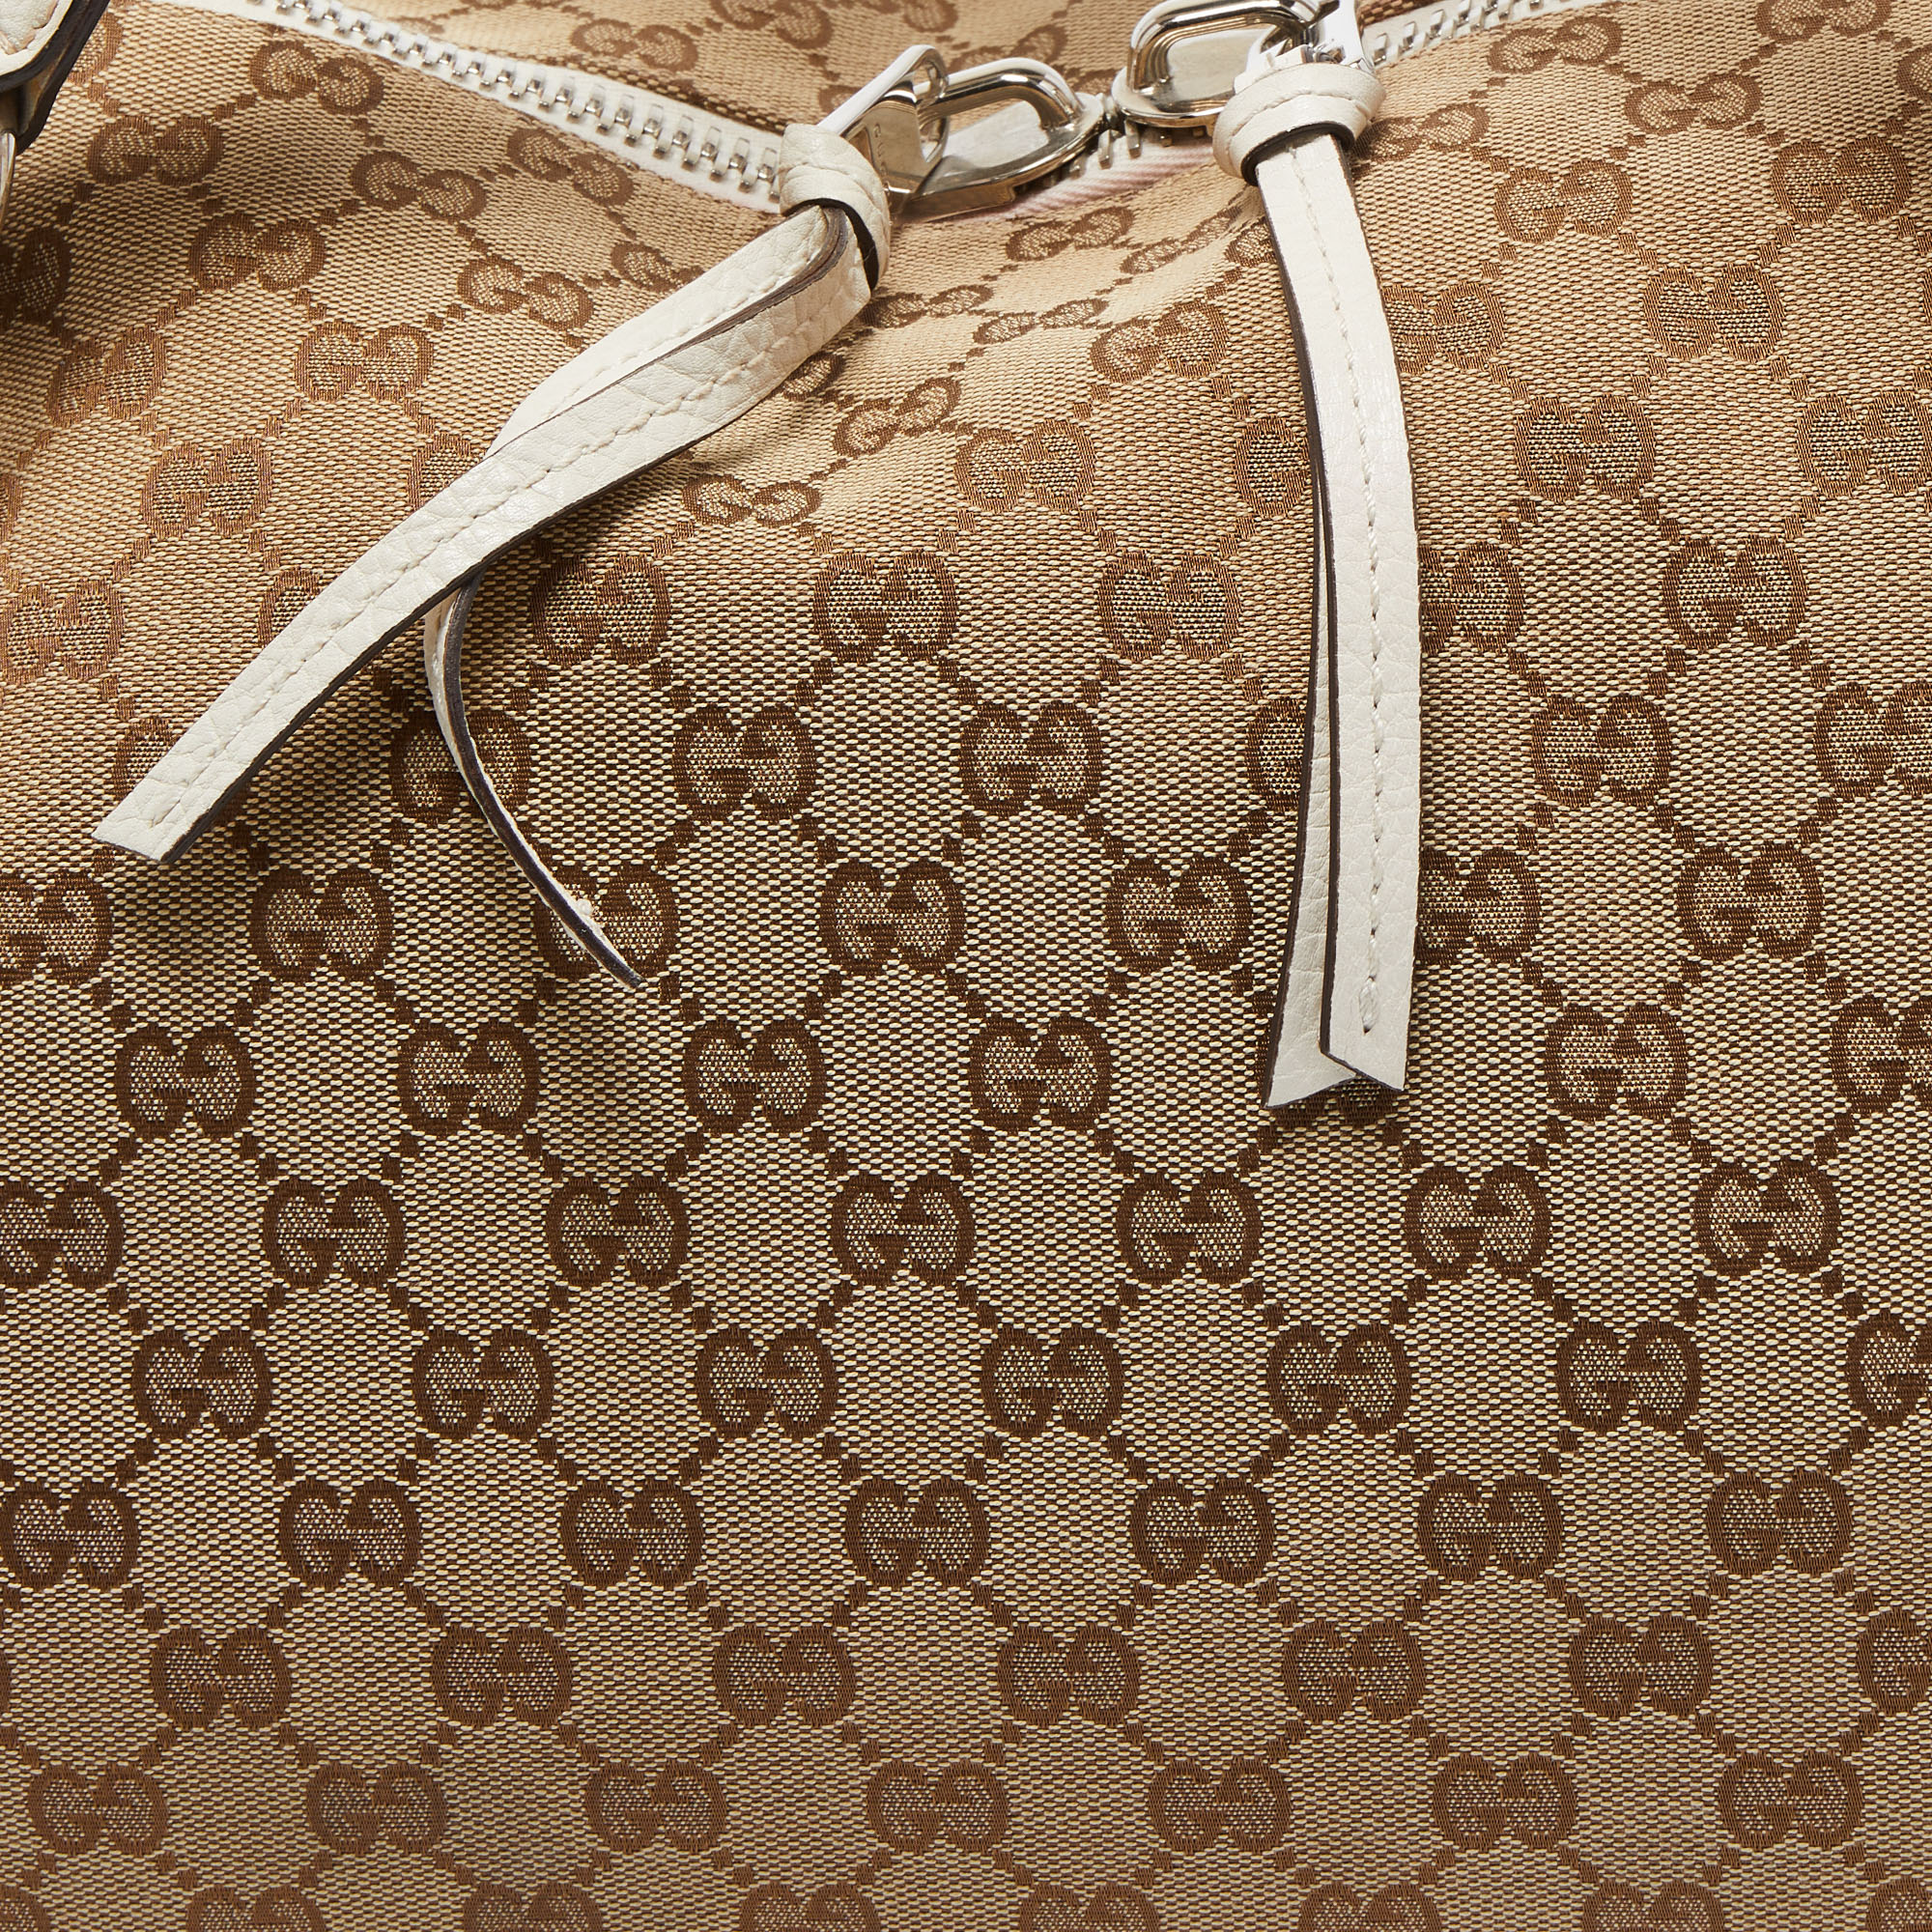 Gucci Beige GG Canvas And Leather Bamboo Bar Shoulder Bag